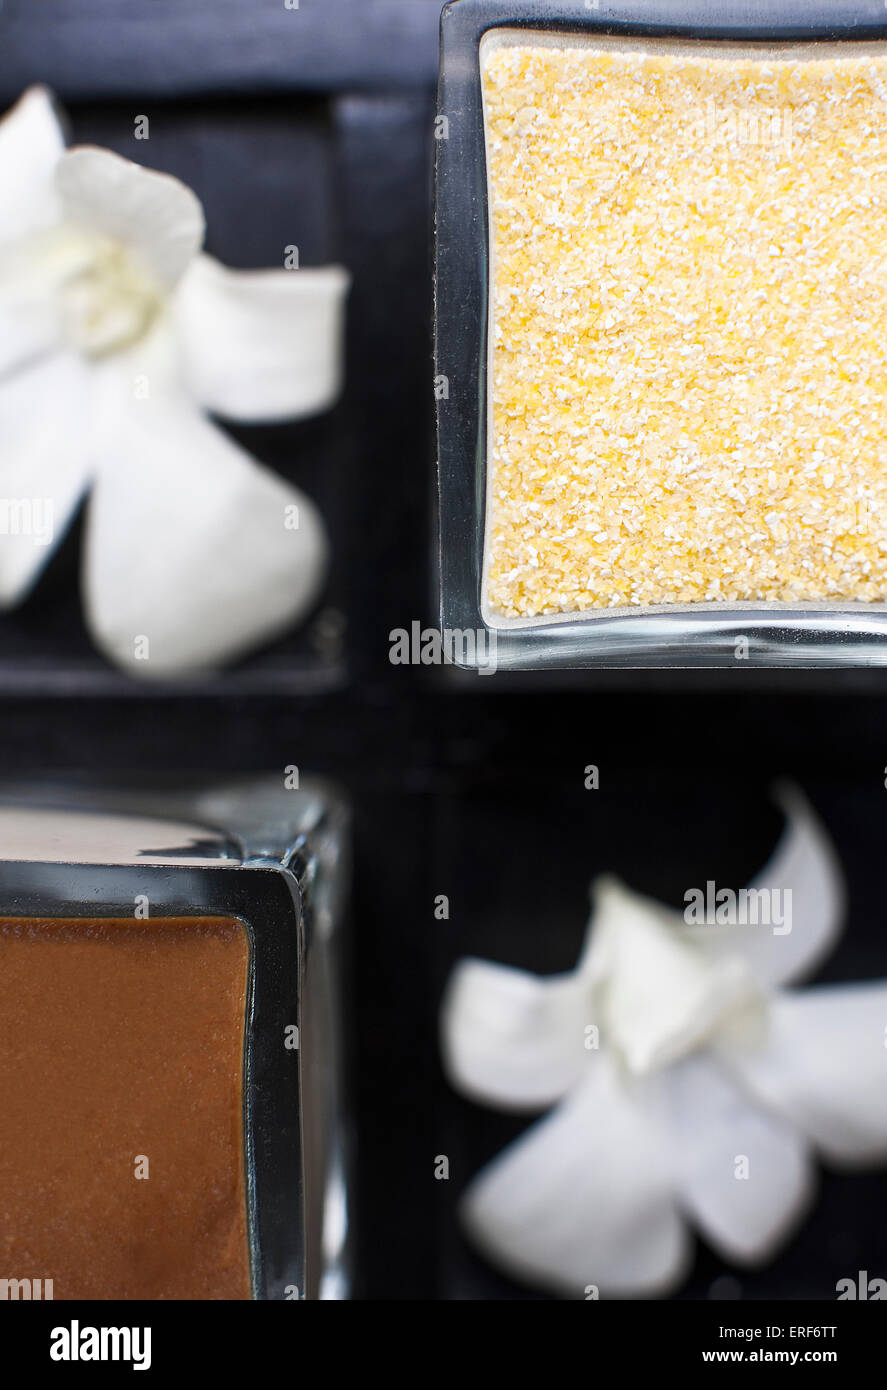 A tray of body scrubs displayed at IN-DI-GO Spa, Phuket, Thailand. Stock Photo